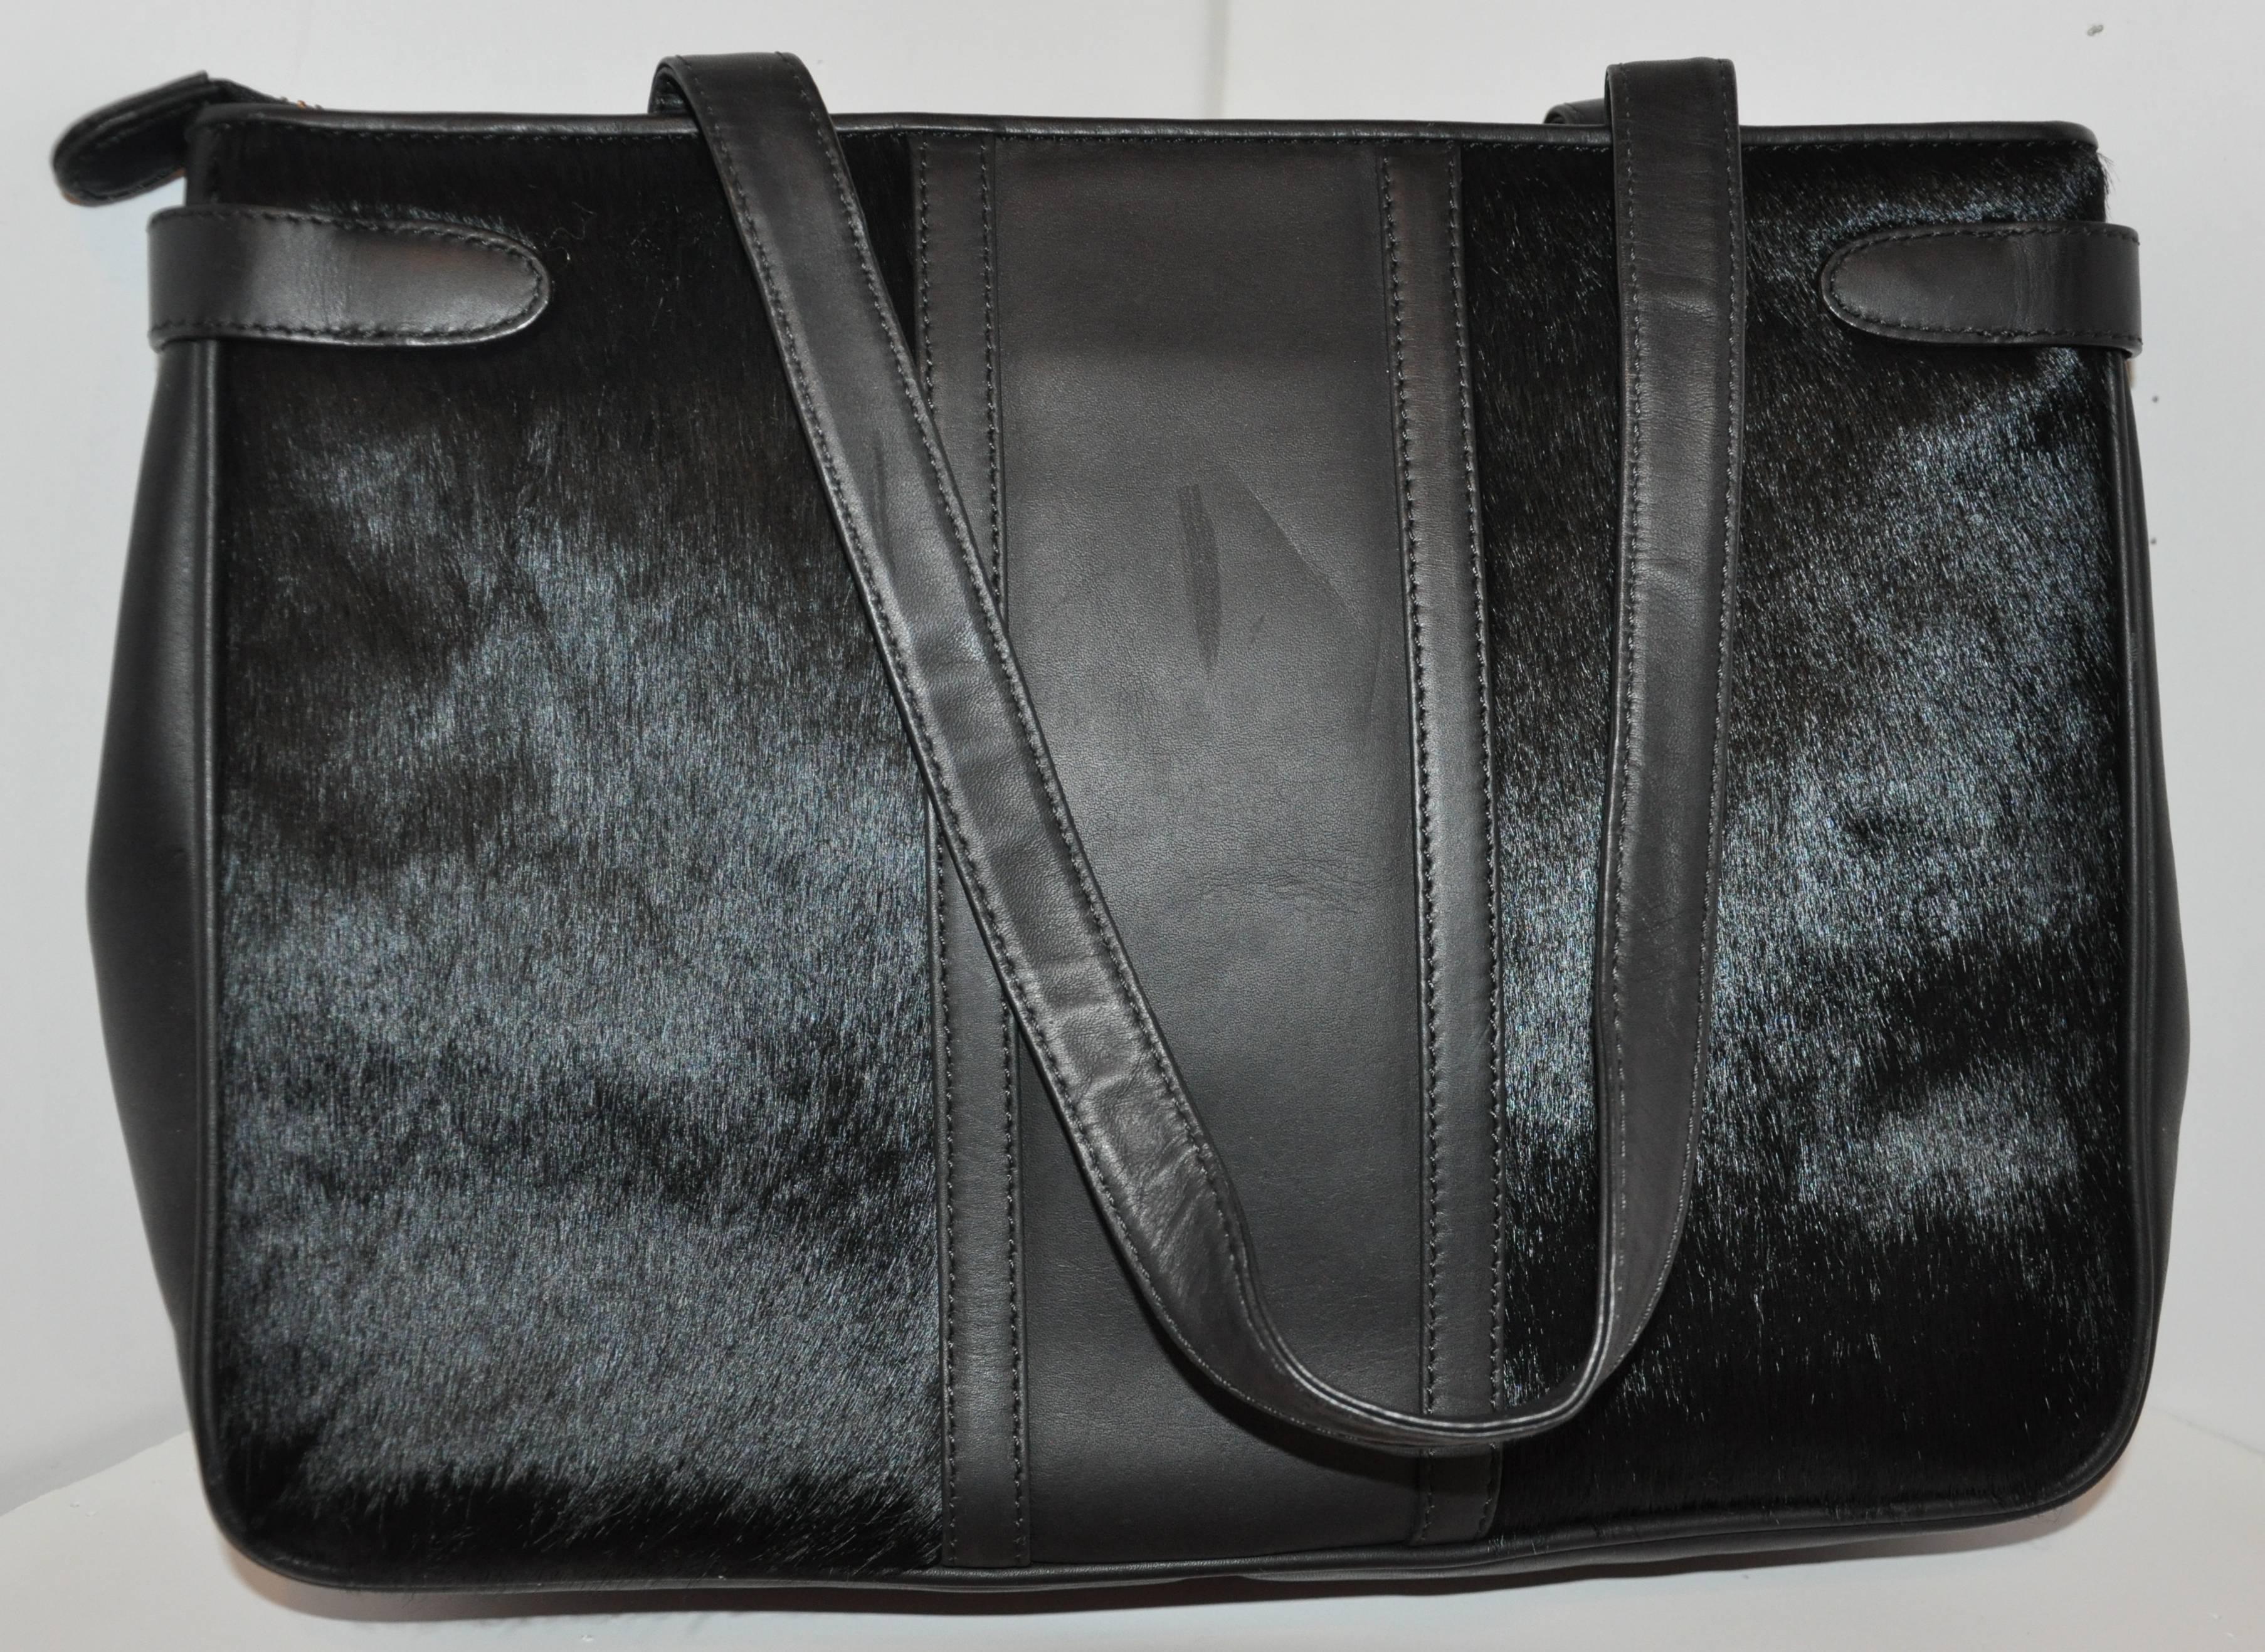         Roberta di Camerino wonderfully detailed black calfskin double-handle handbag with accented with brushed pony skin. The center-front is embossed with their signature logo. The handbag is detailed with vermeil-finish gold hardware as well as